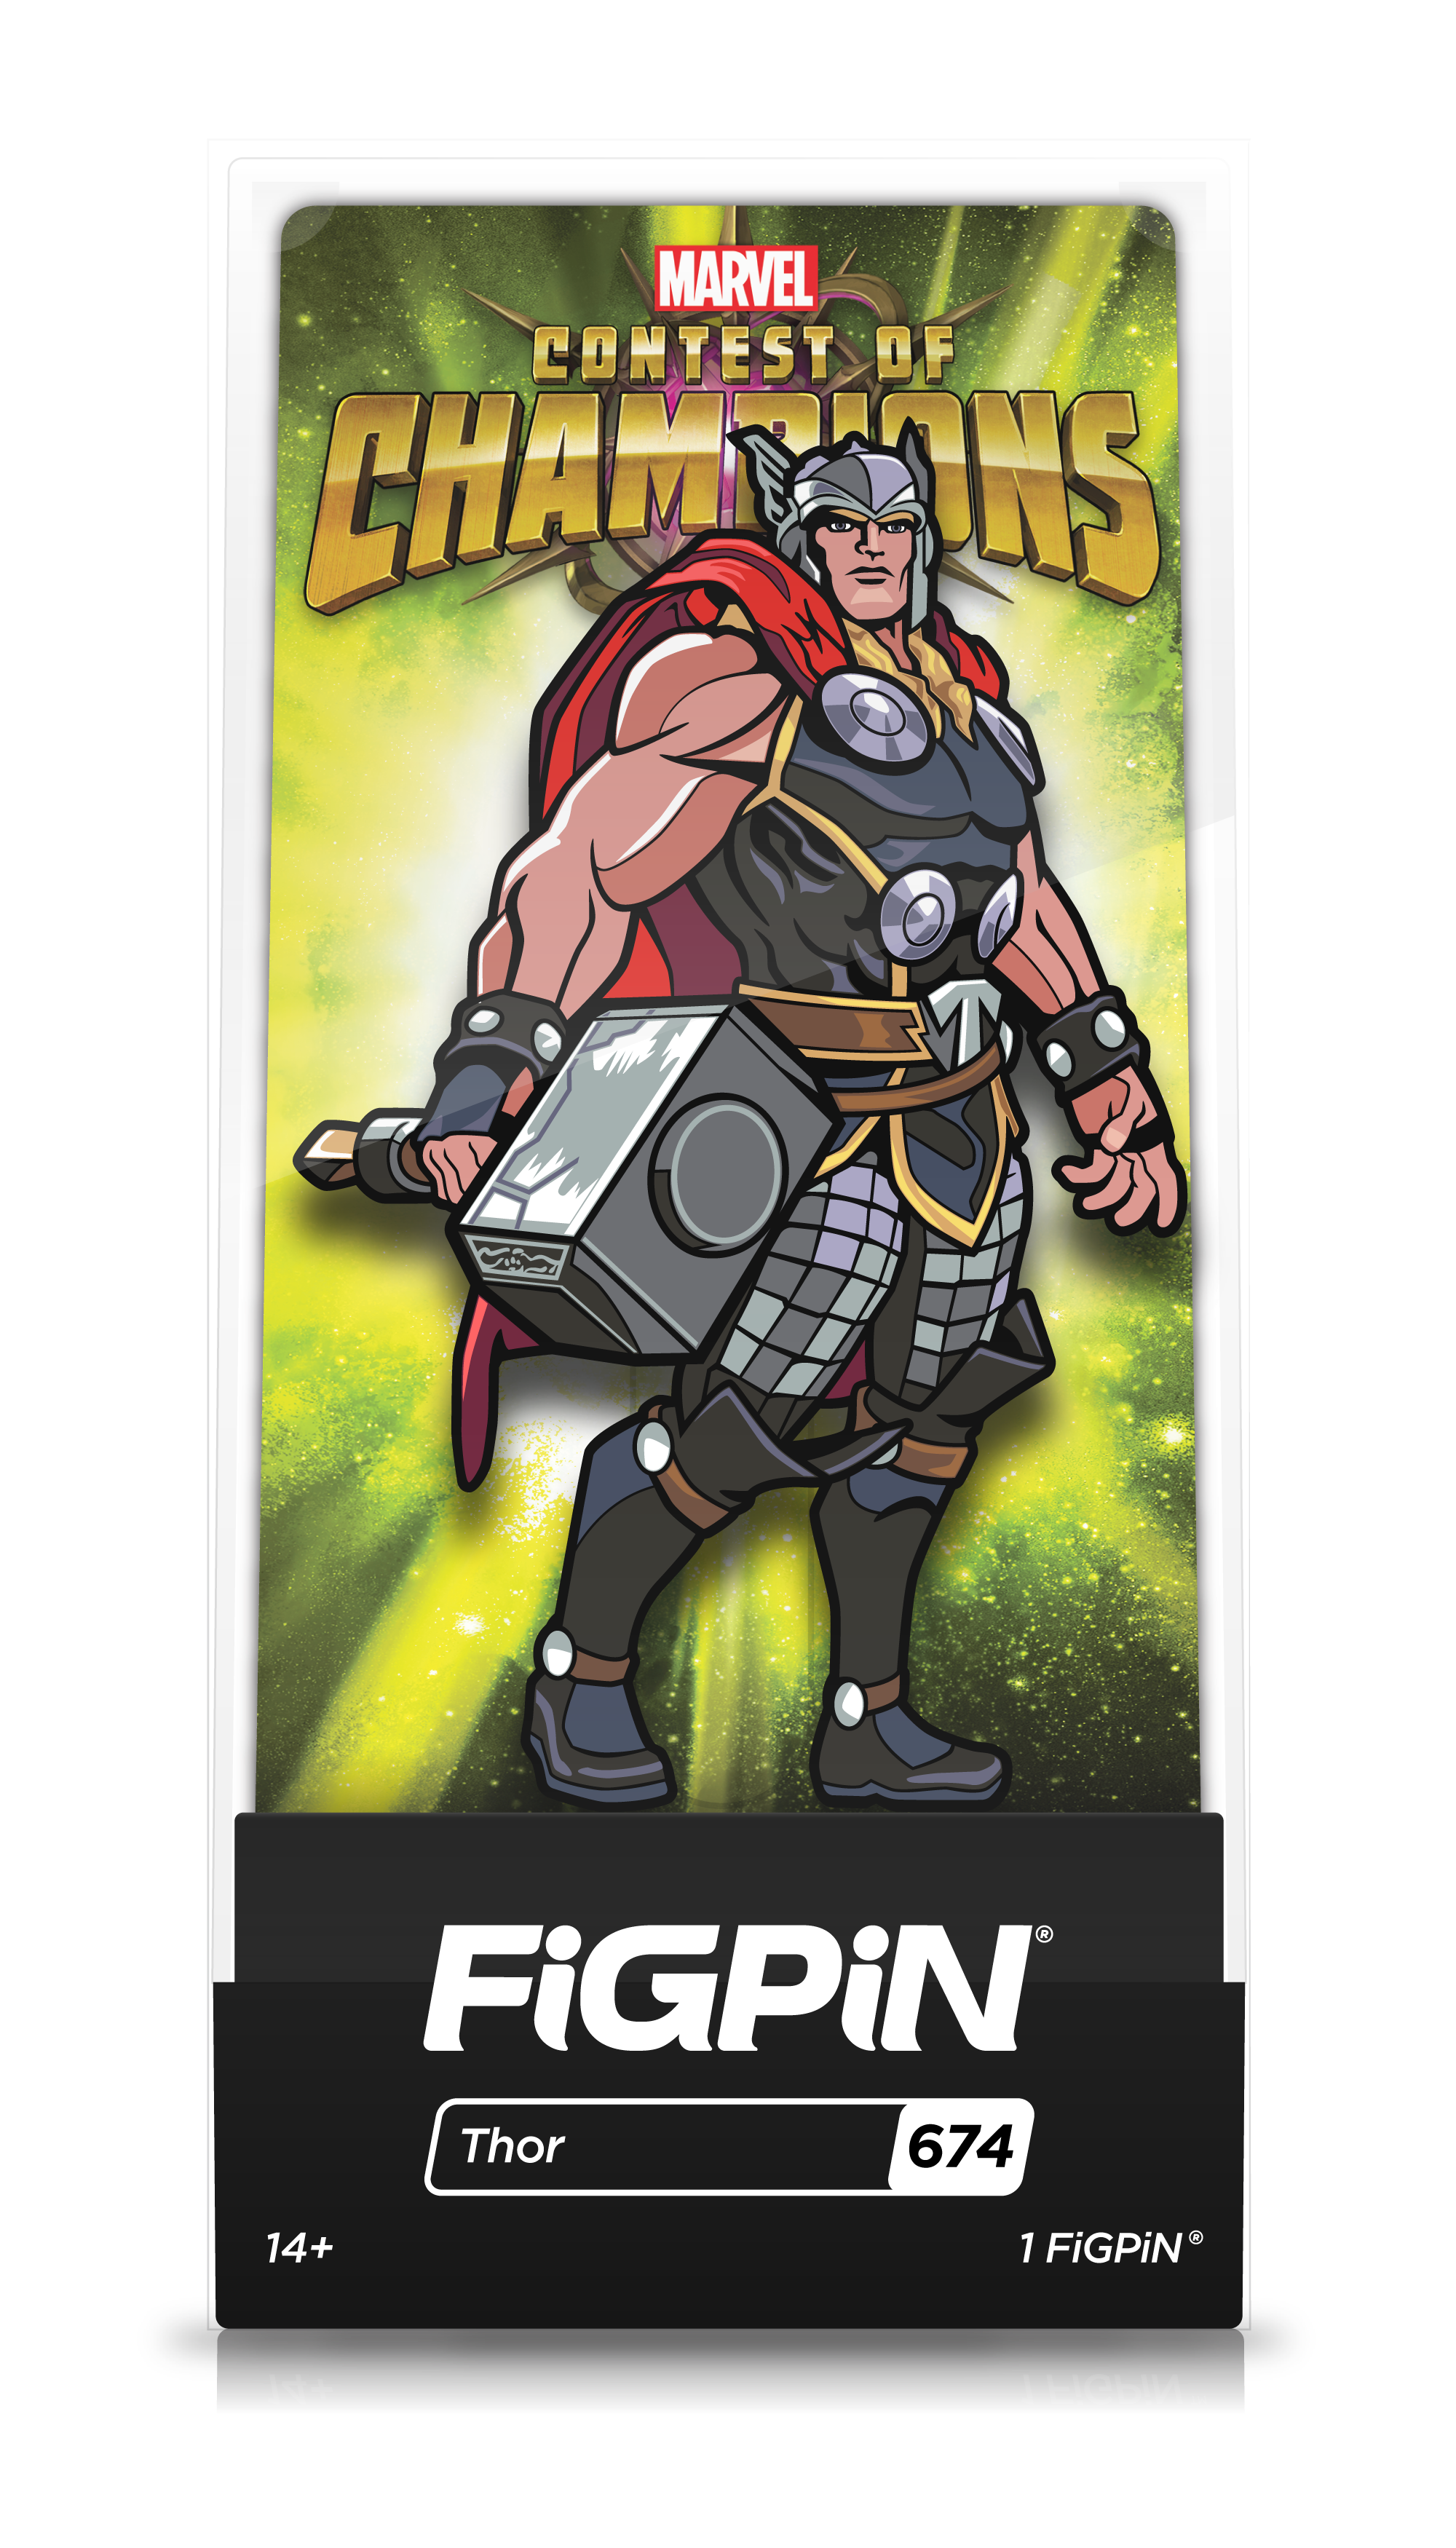 FiGPiN Reveals More Marvel Contest of Champions Characters - TV